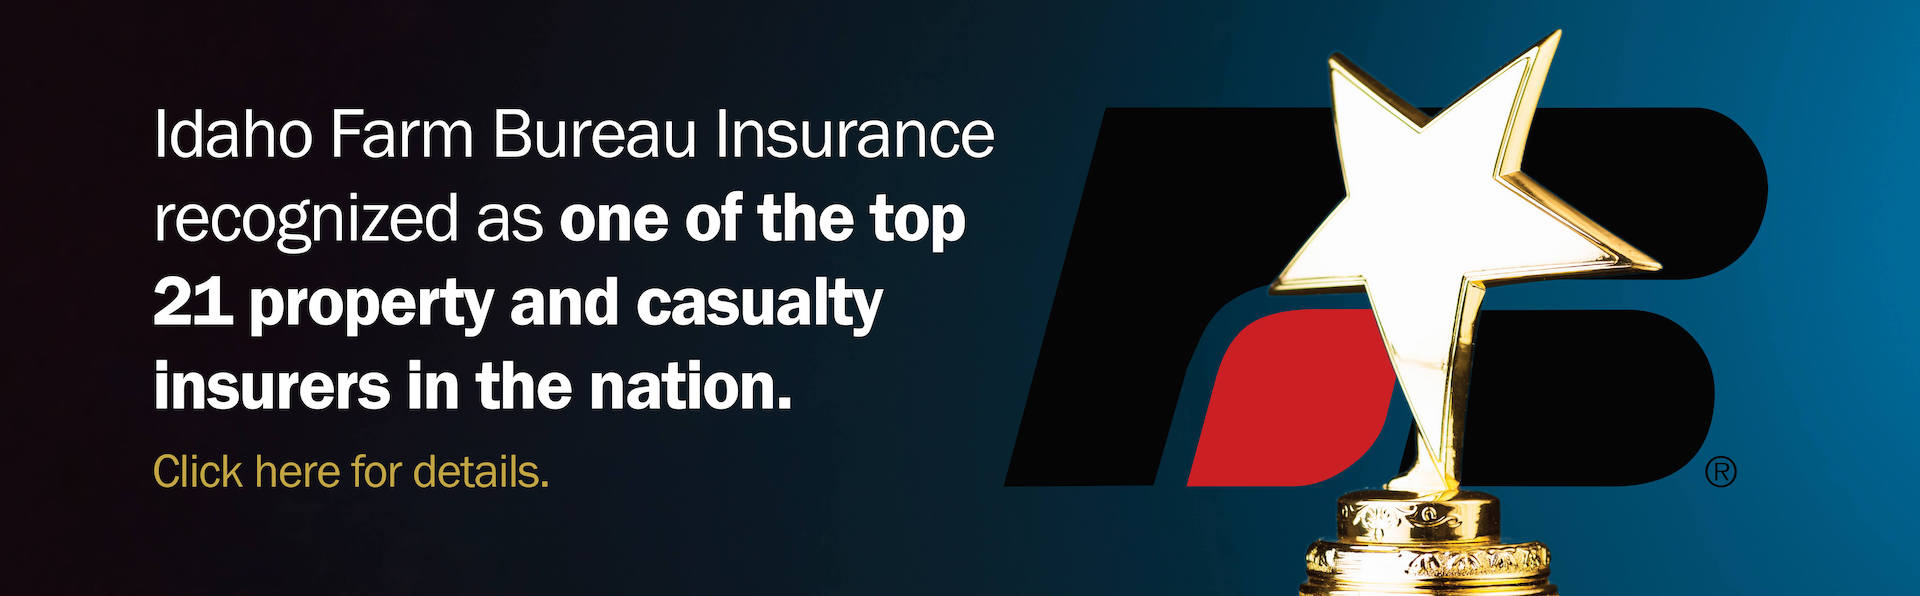 Idaho Farm Bureau Insurance recognized as one of the top 21 property and casualty insurers in the nation